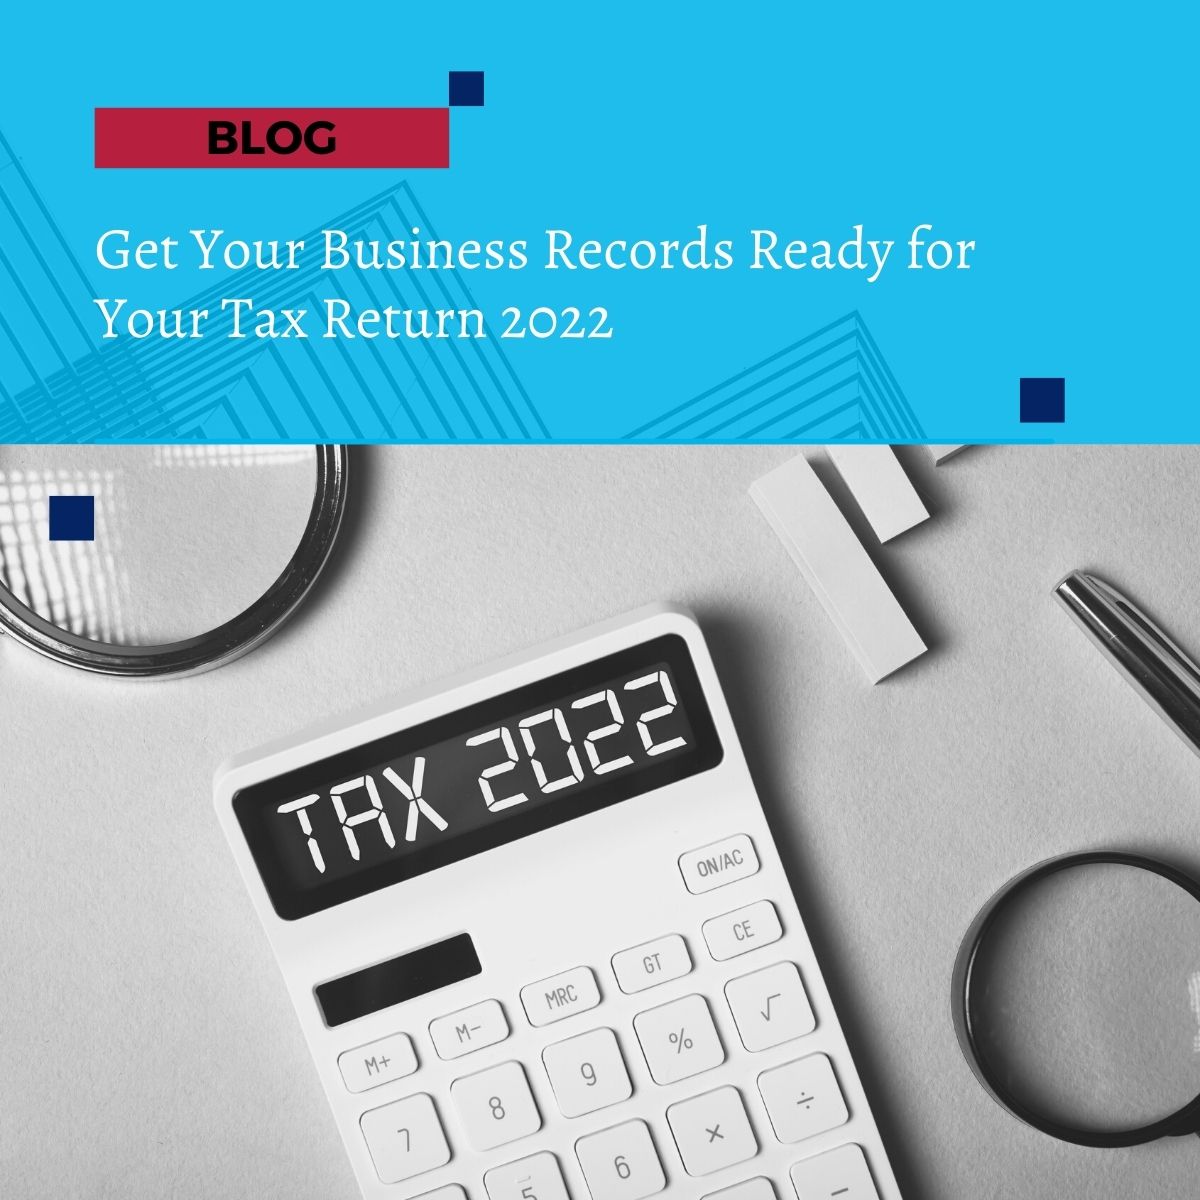 Get Your Business Records Ready for Your Tax Return 2022